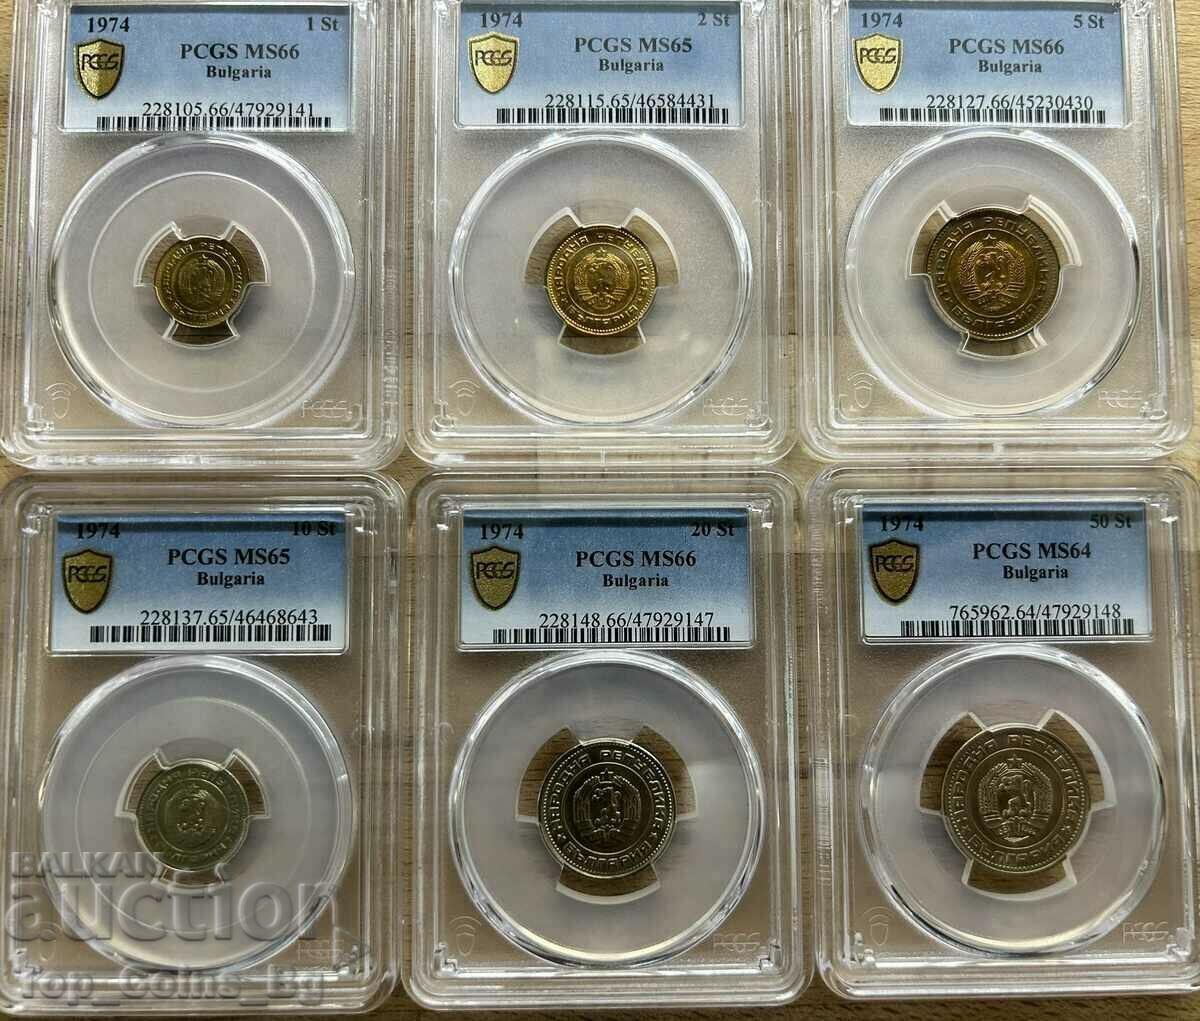 1974 High MS SET, PCGS CERTIFIED